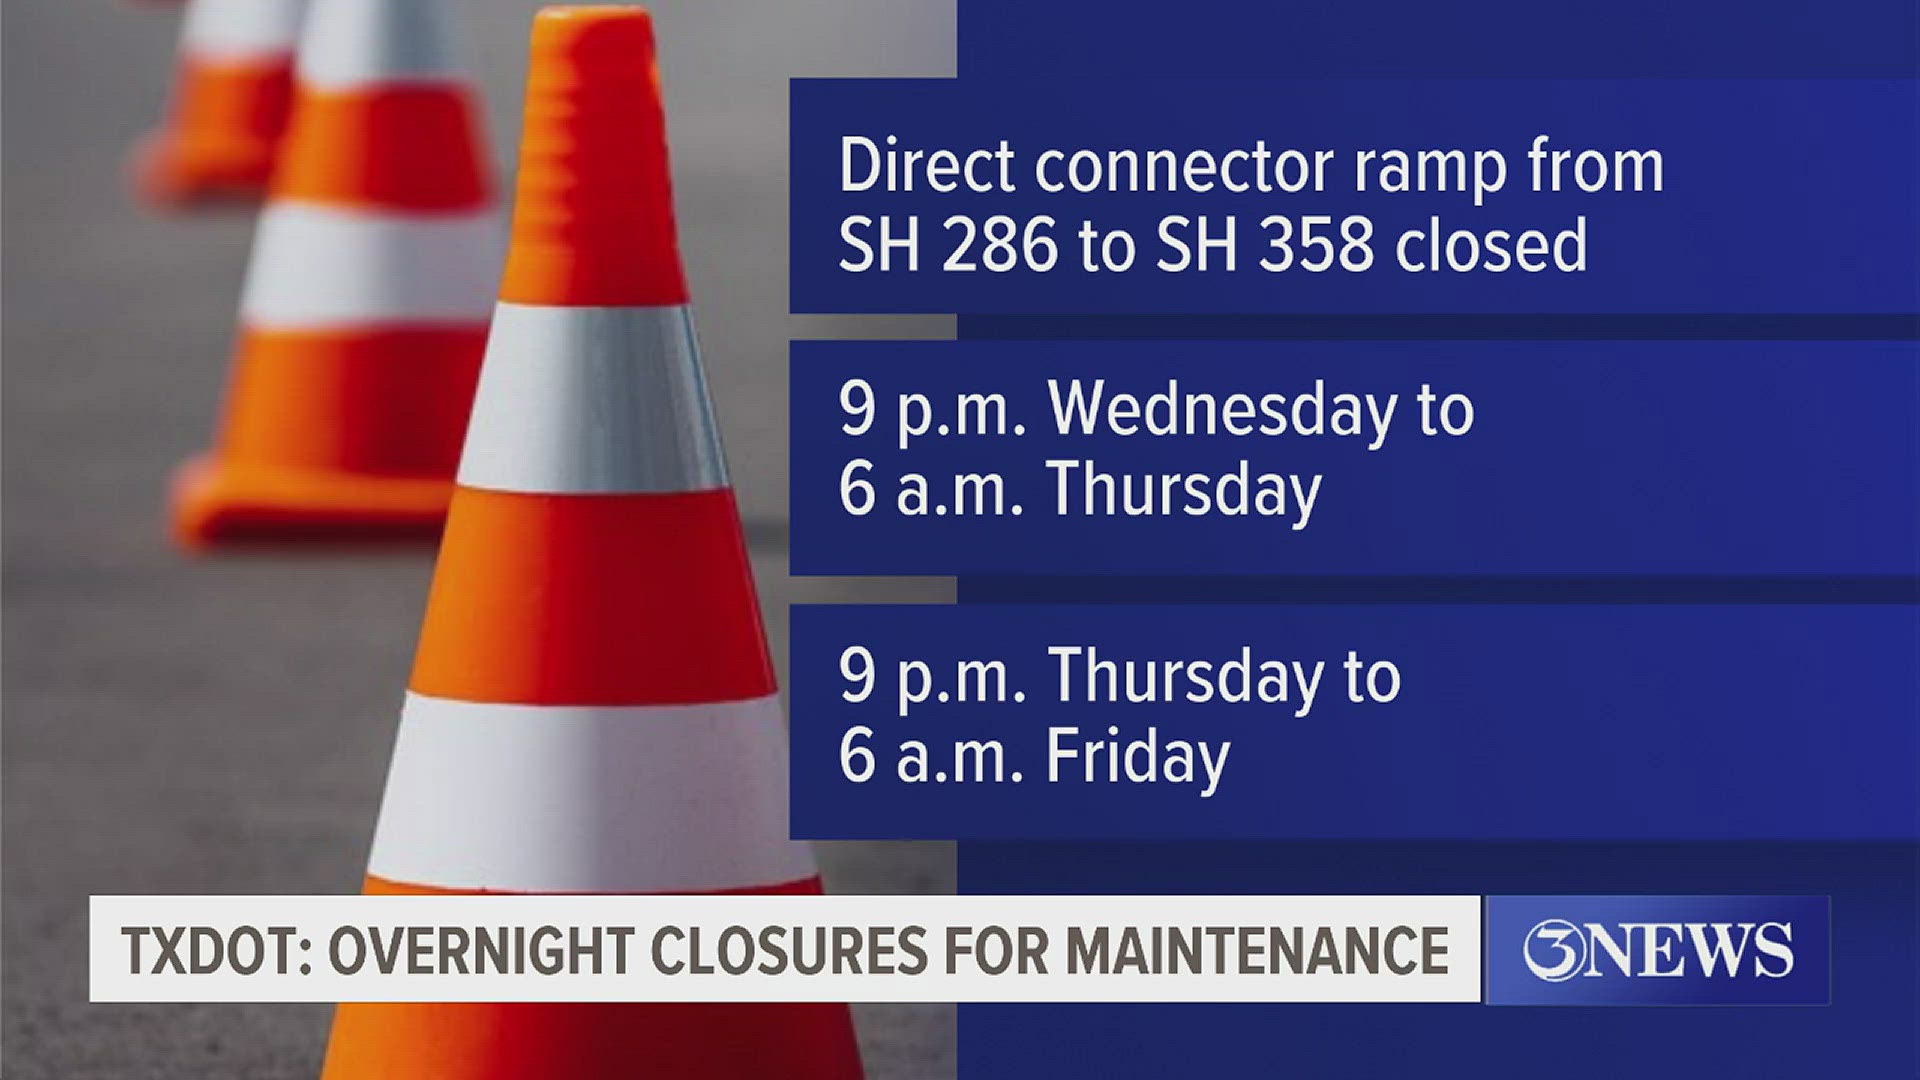 ​Traffic will be moved to eastbound SH 358 during the closures on both nights.